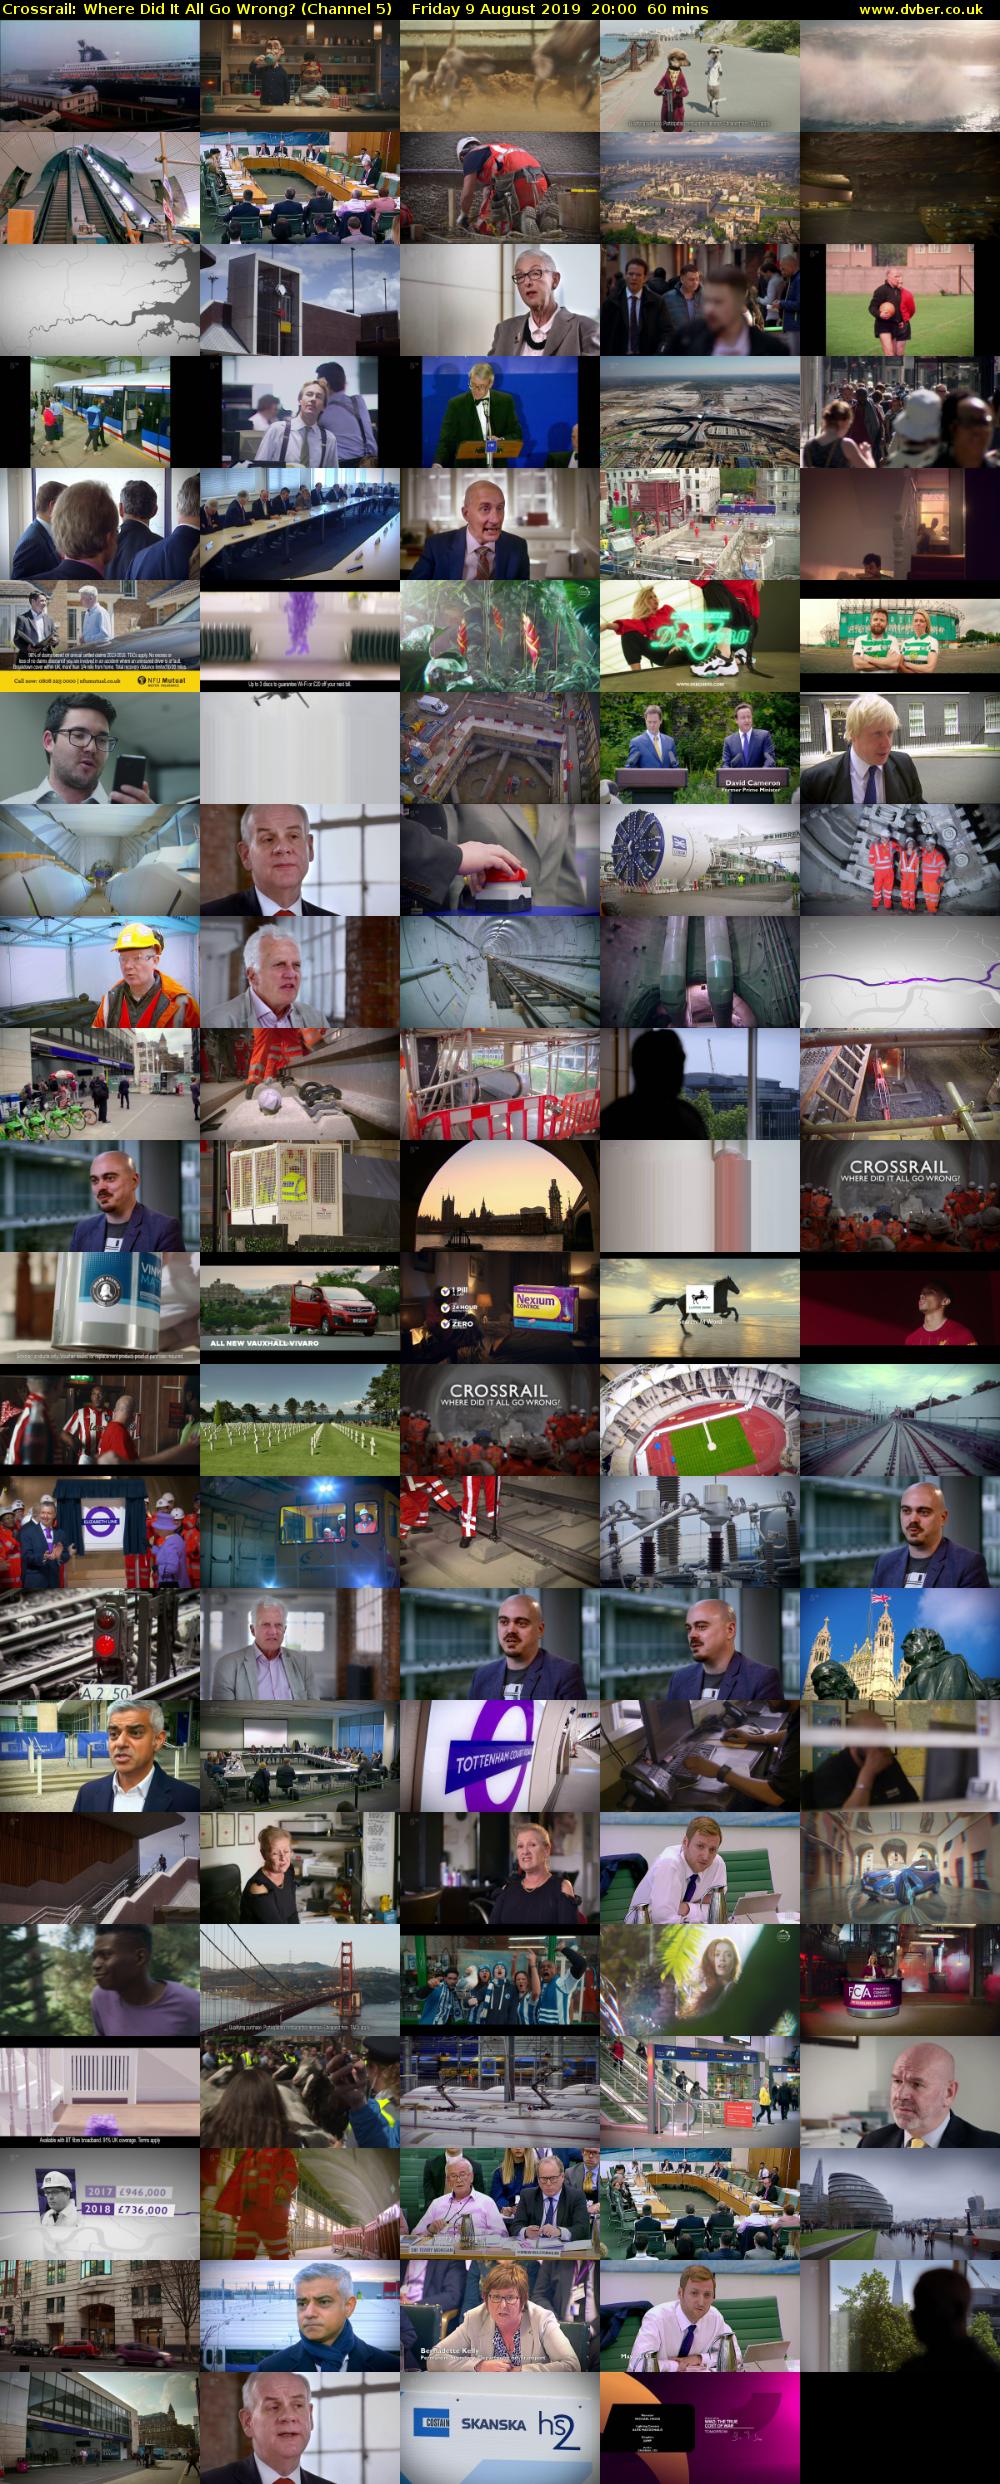 Crossrail: Where Did It All Go Wrong? (Channel 5) Friday 9 August 2019 20:00 - 21:00